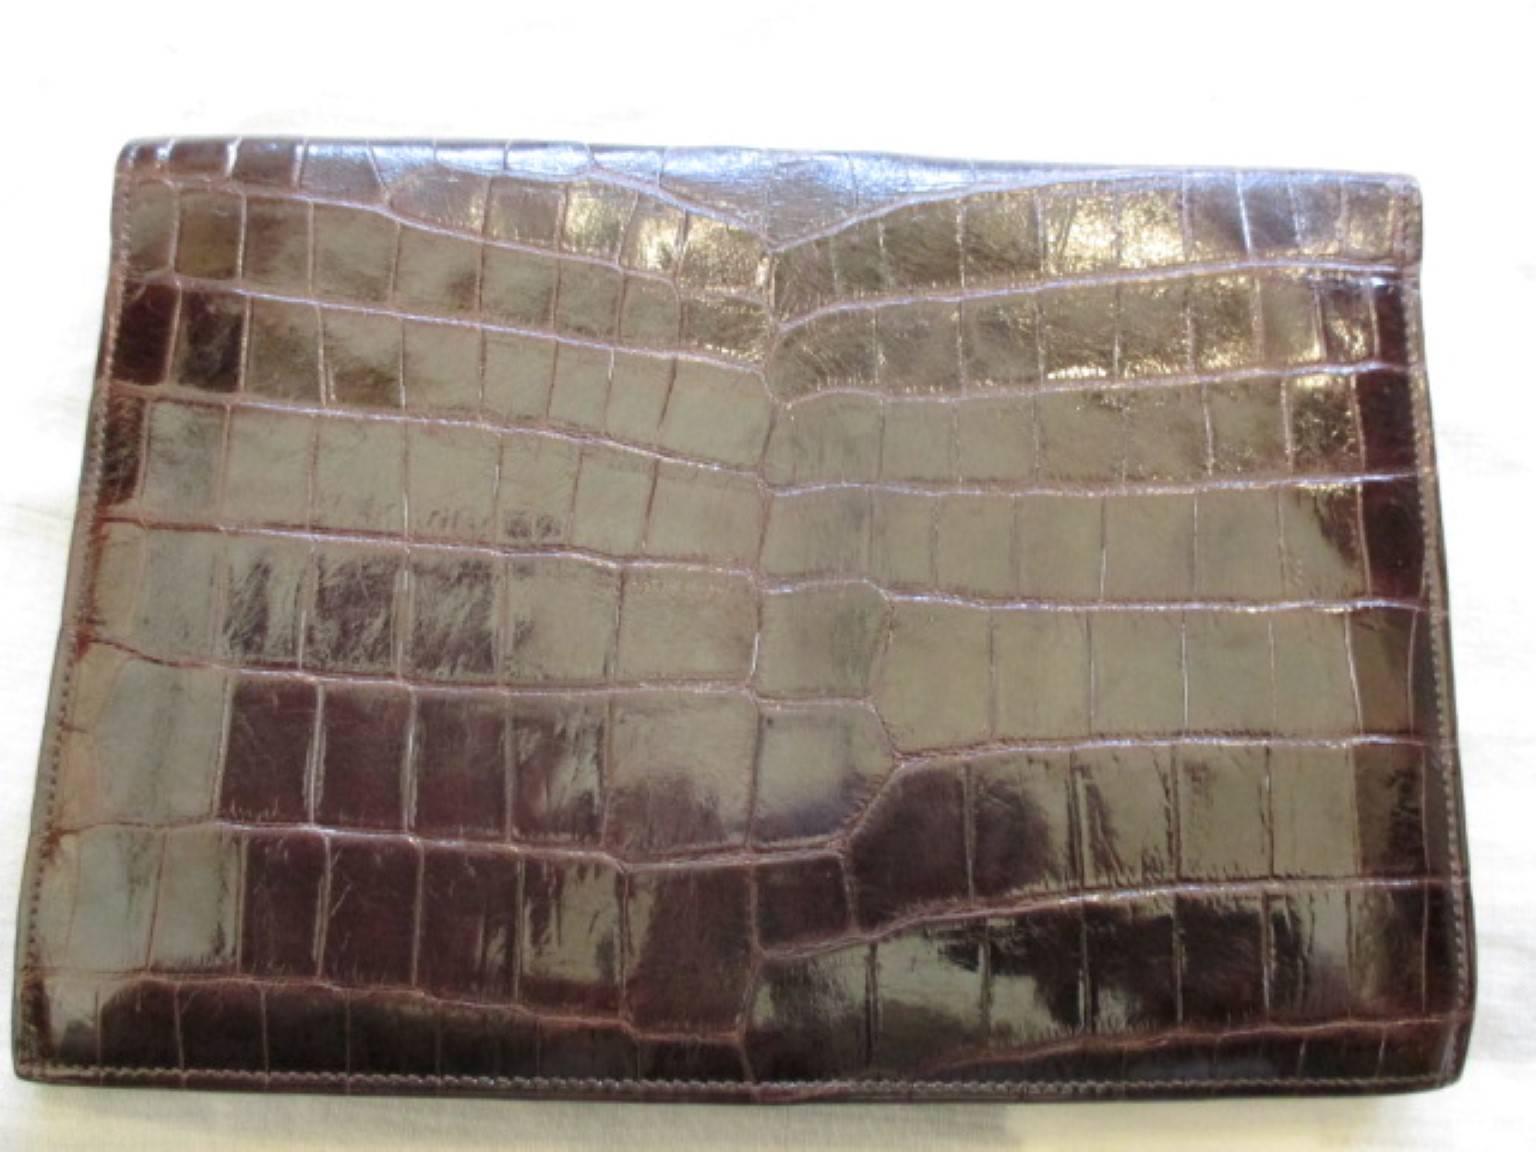 This unique vintage brown crocodile leather 'Pan' clutch from Hermès featuring a foldover top with Art-deco push-lock closure of sterling silver signed Hermes  and is made around 1930-1940's.
The inside is soft leather.
Its a collectors item.
The